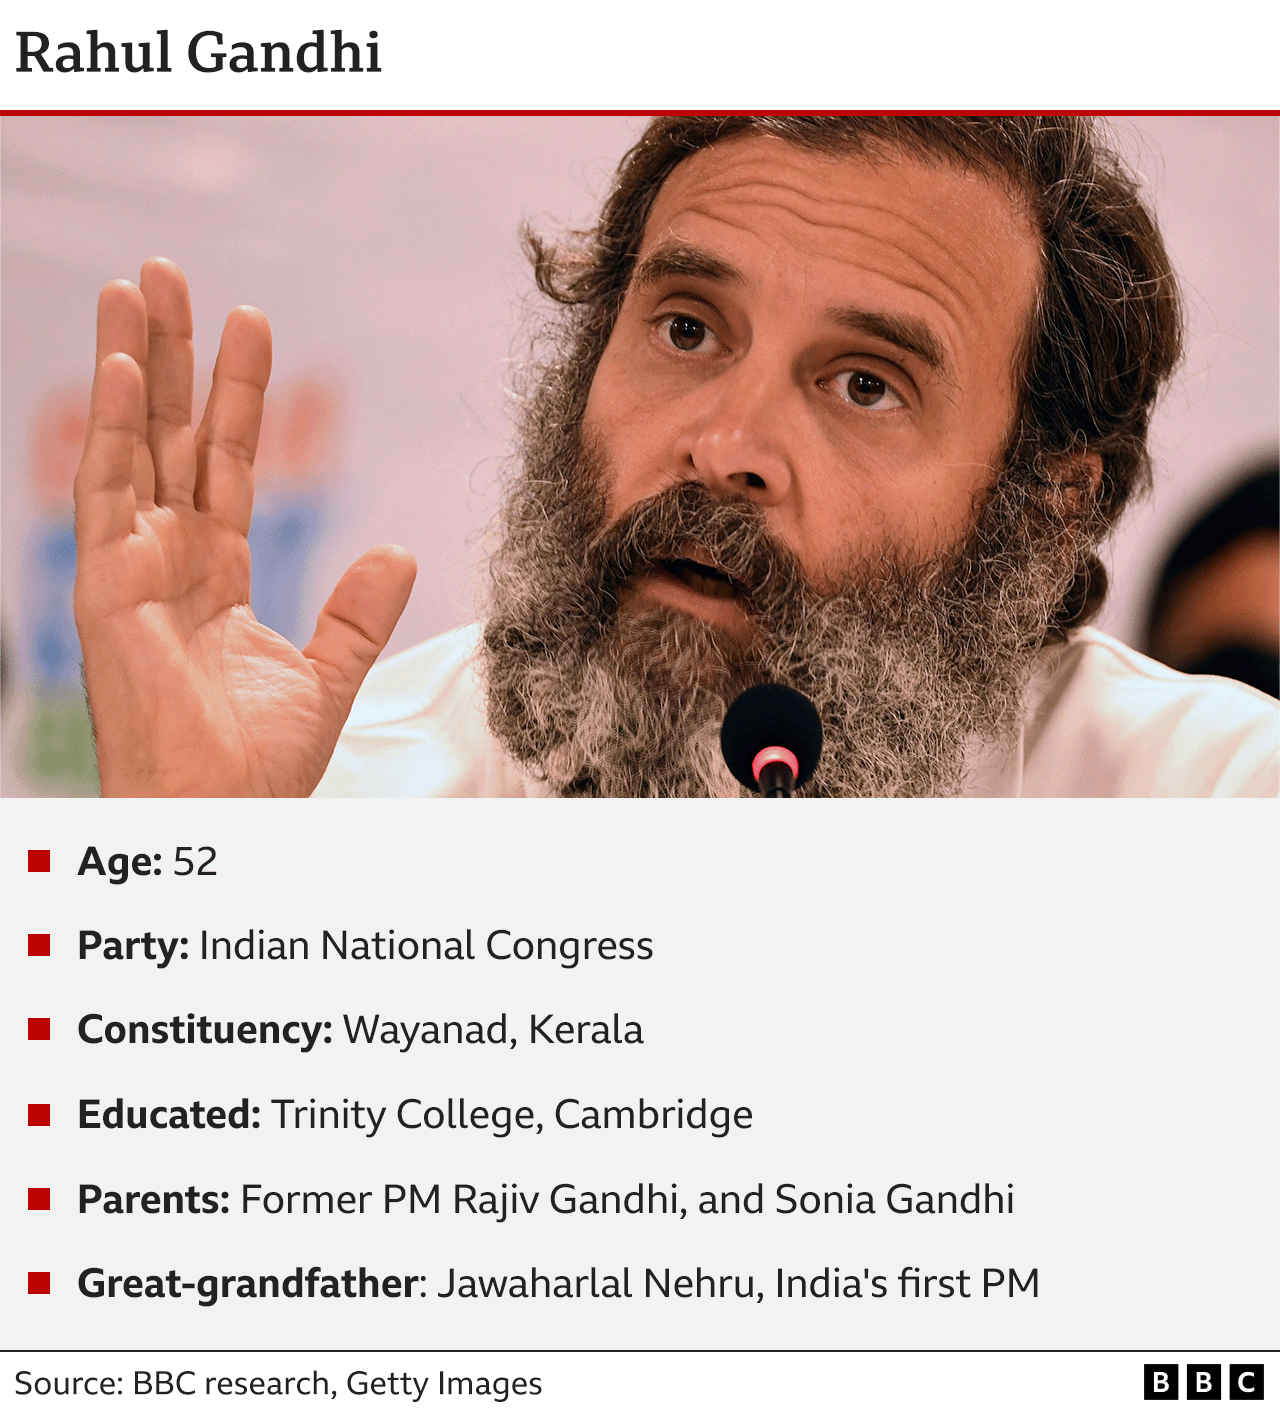 Data pic showing: Rahul Gandhi, Age: 52, Party: Indian National Congress, Constituency: Wayanad, Kerala, Educated: Trinity College, Cambridge, Parents: Former prime minister Rajiv Gandhi, and Italian-born Sonia Gandhi, Great-grandfather: Jawaharlal Nehru, India's first prime minister